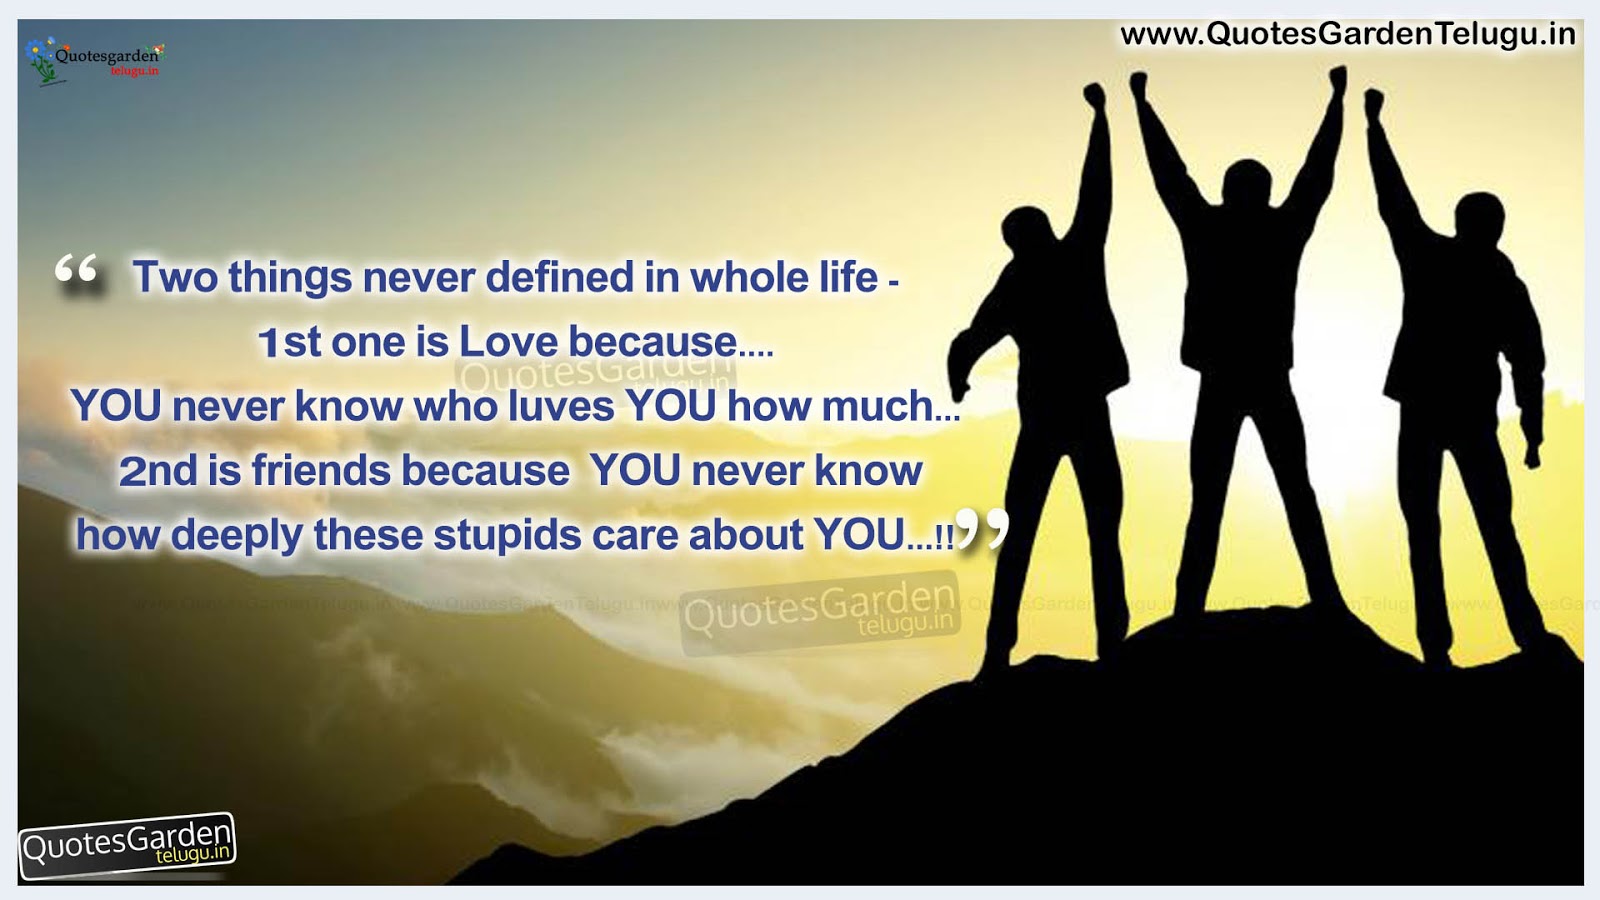 Friendship Quotes With In English Hd Heart touching friendship love quotes with hd wallpapers